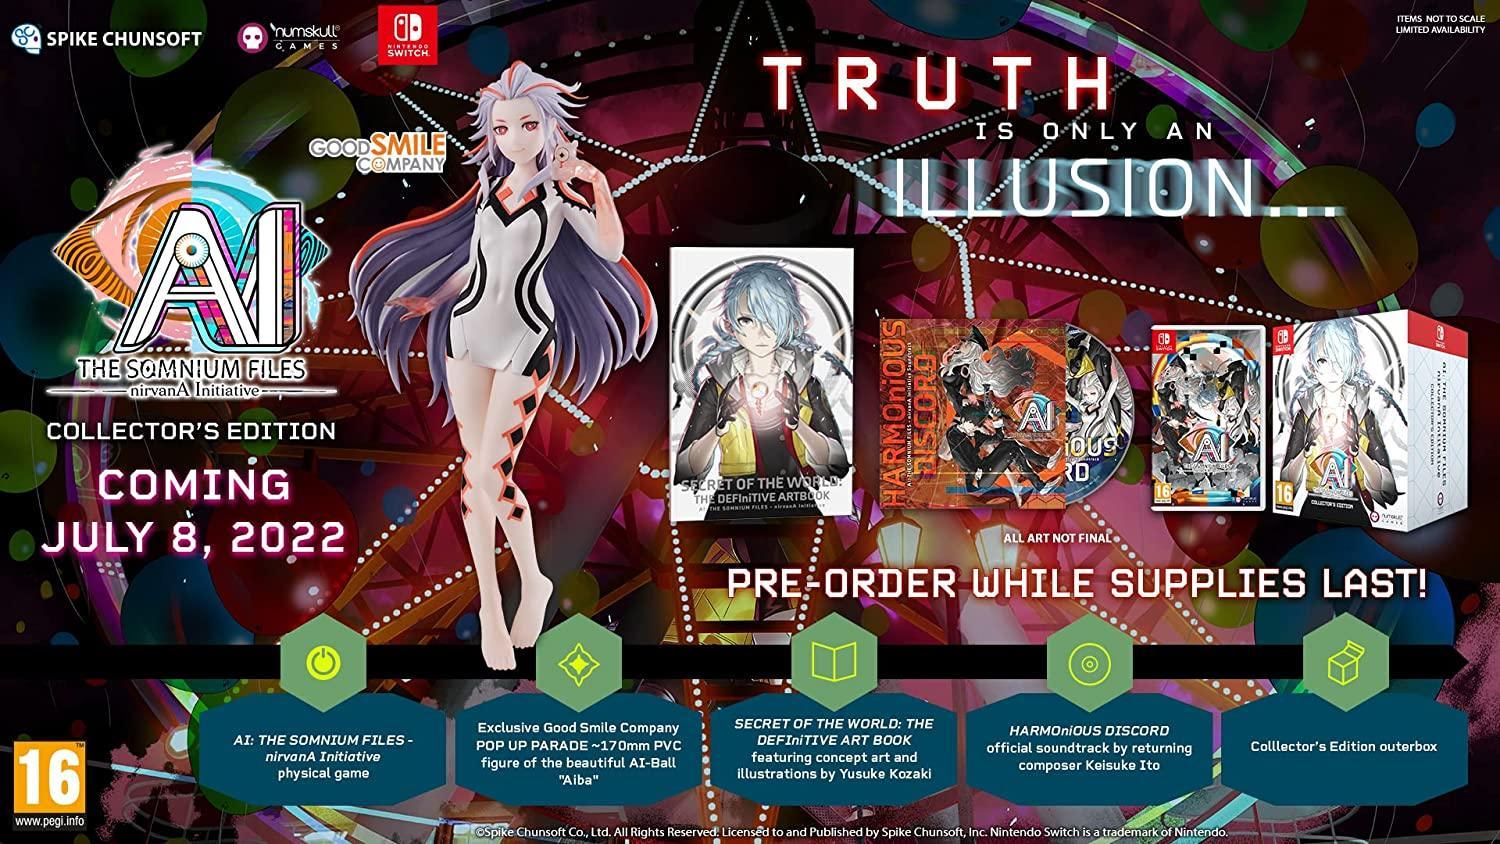 AI The Somnium Files nirvanA Initiative Collector's Edition - Nintendo Switch - GD Games 